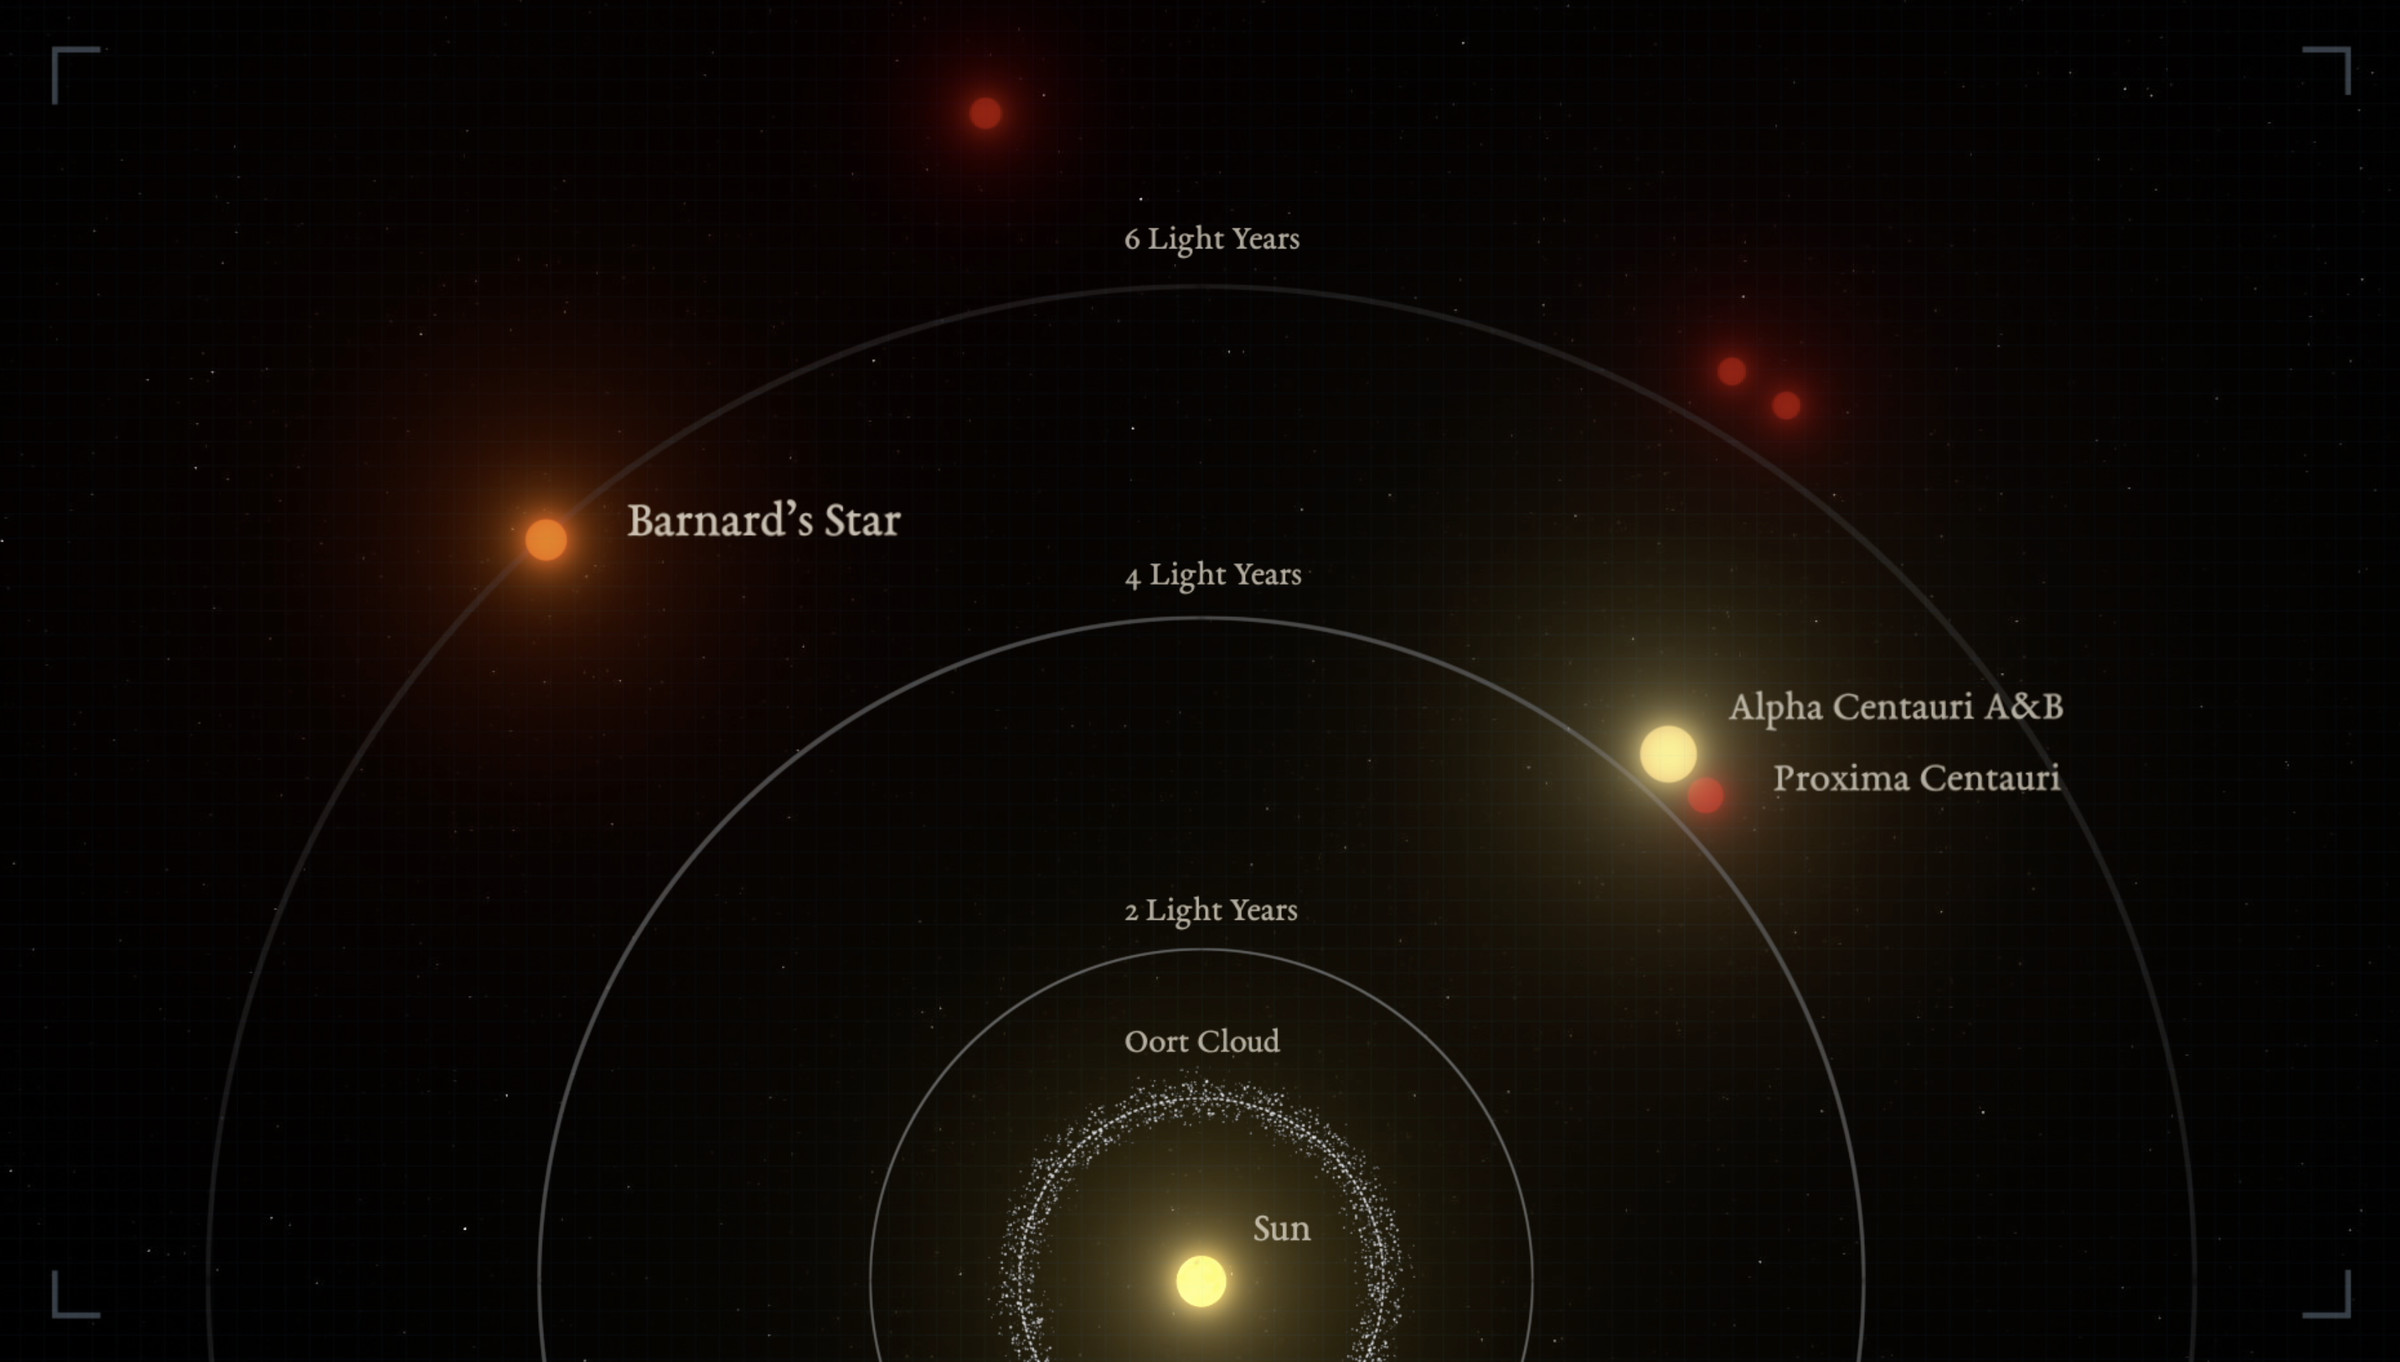 A graphic showing the relative distances of the closest stars to our Solar System.